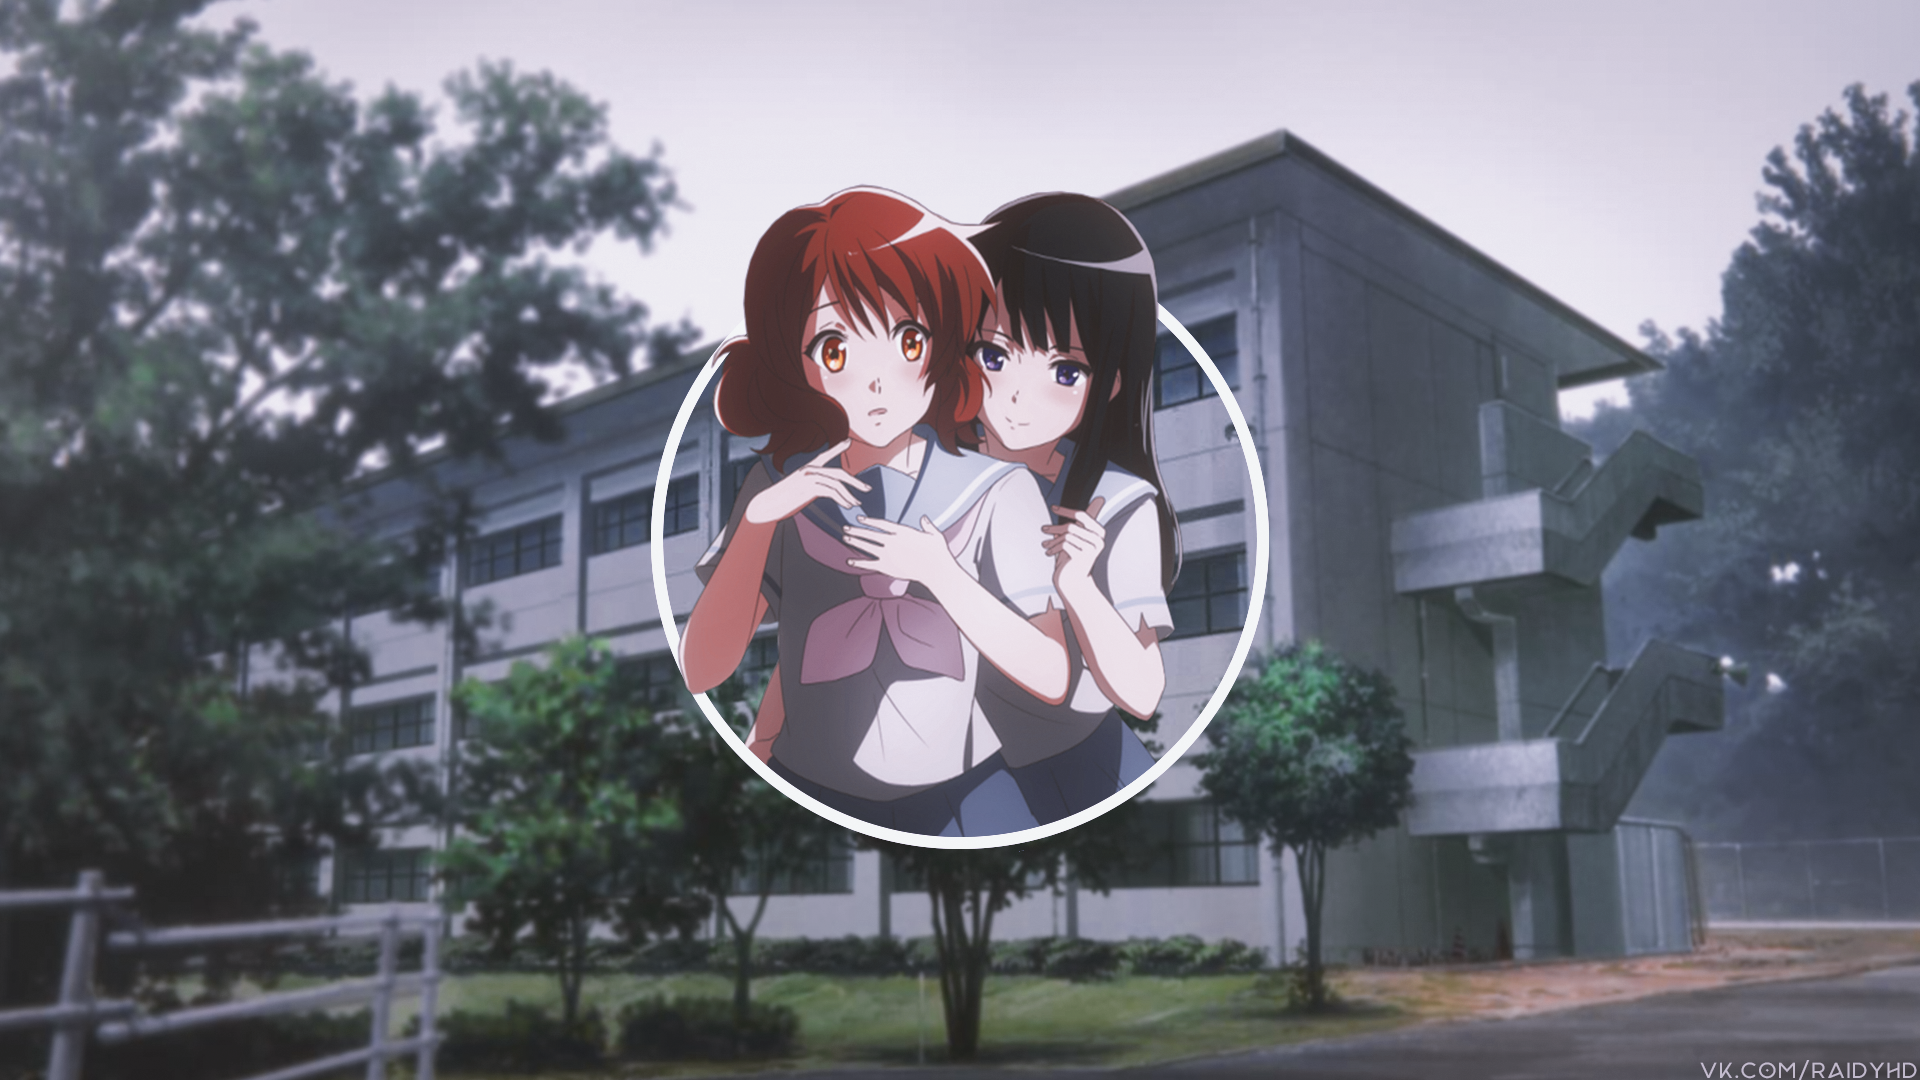 Anime 1920x1080 anime anime girls picture-in-picture Hibike! Euphonium watermarked